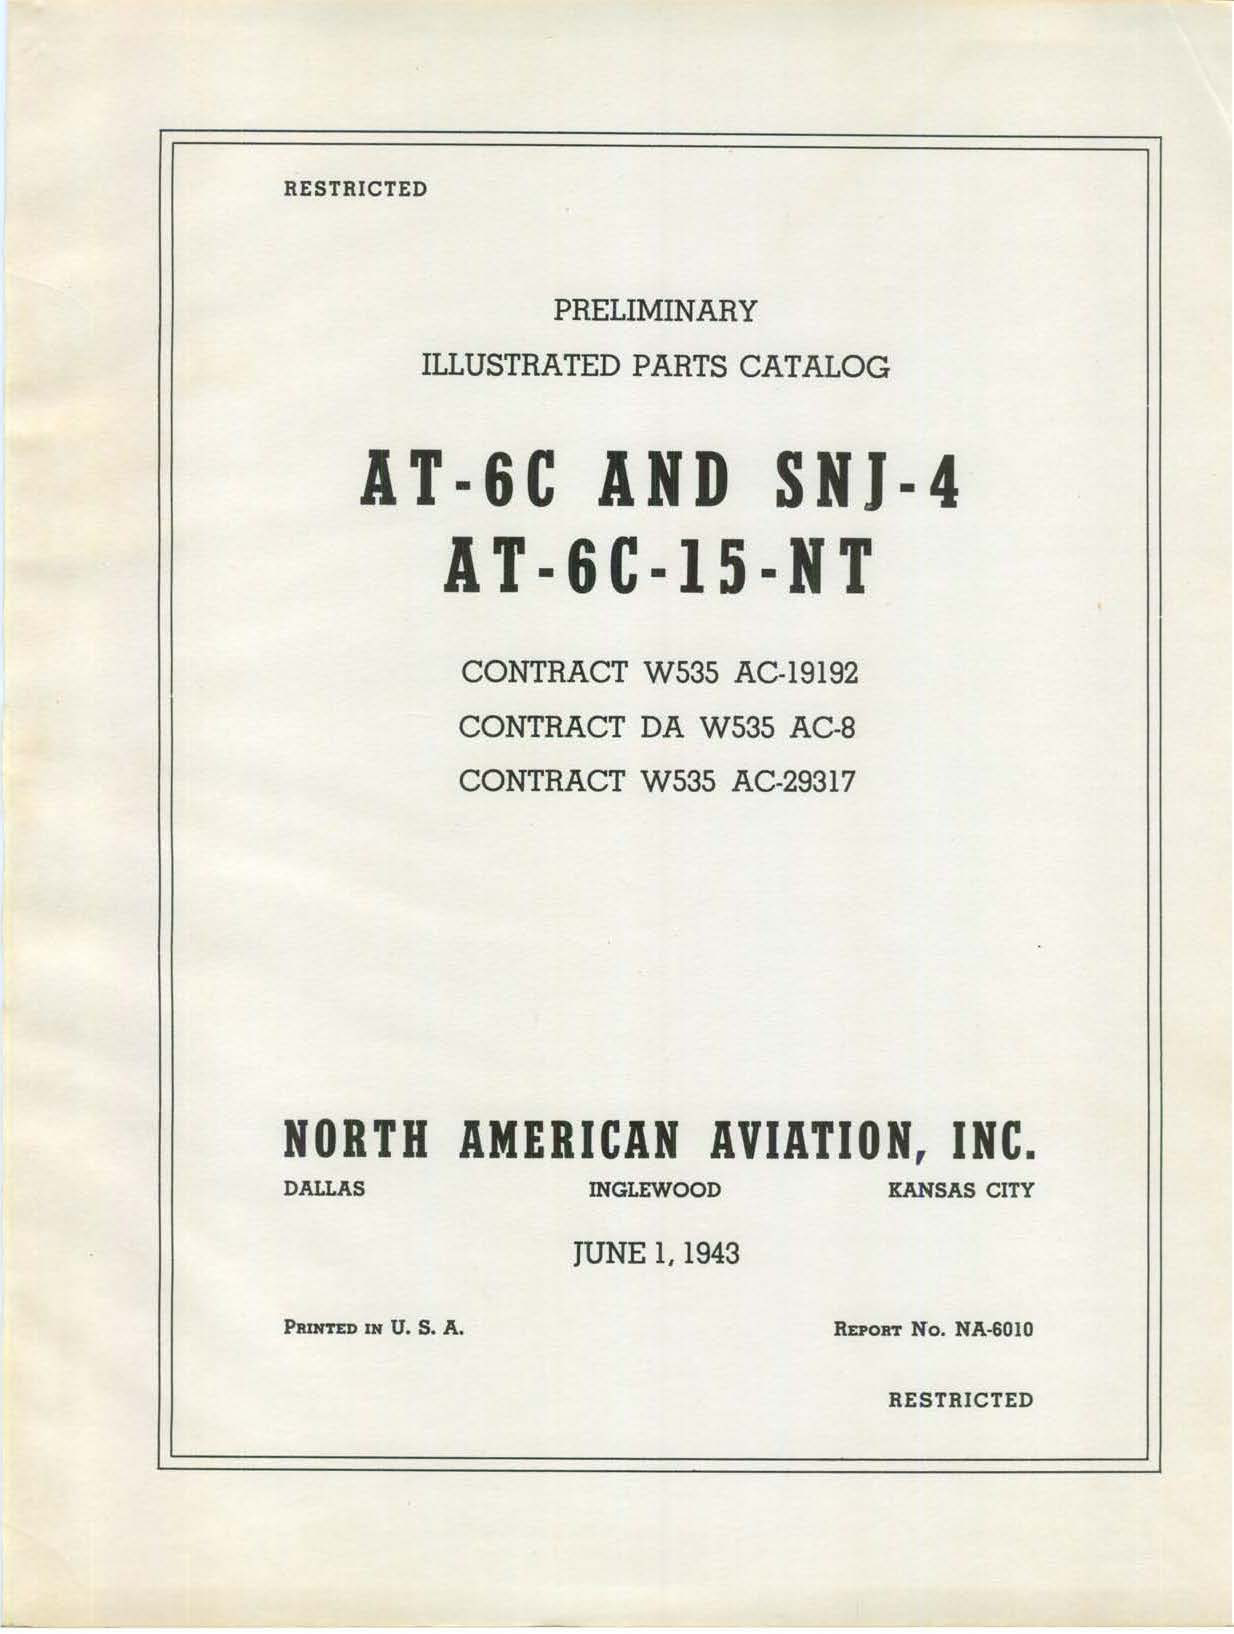 Sample page 1 from AirCorps Library document: Illustrated Parts Catalog for AT-6C, SNJ-4 and AT-6C-15-NT